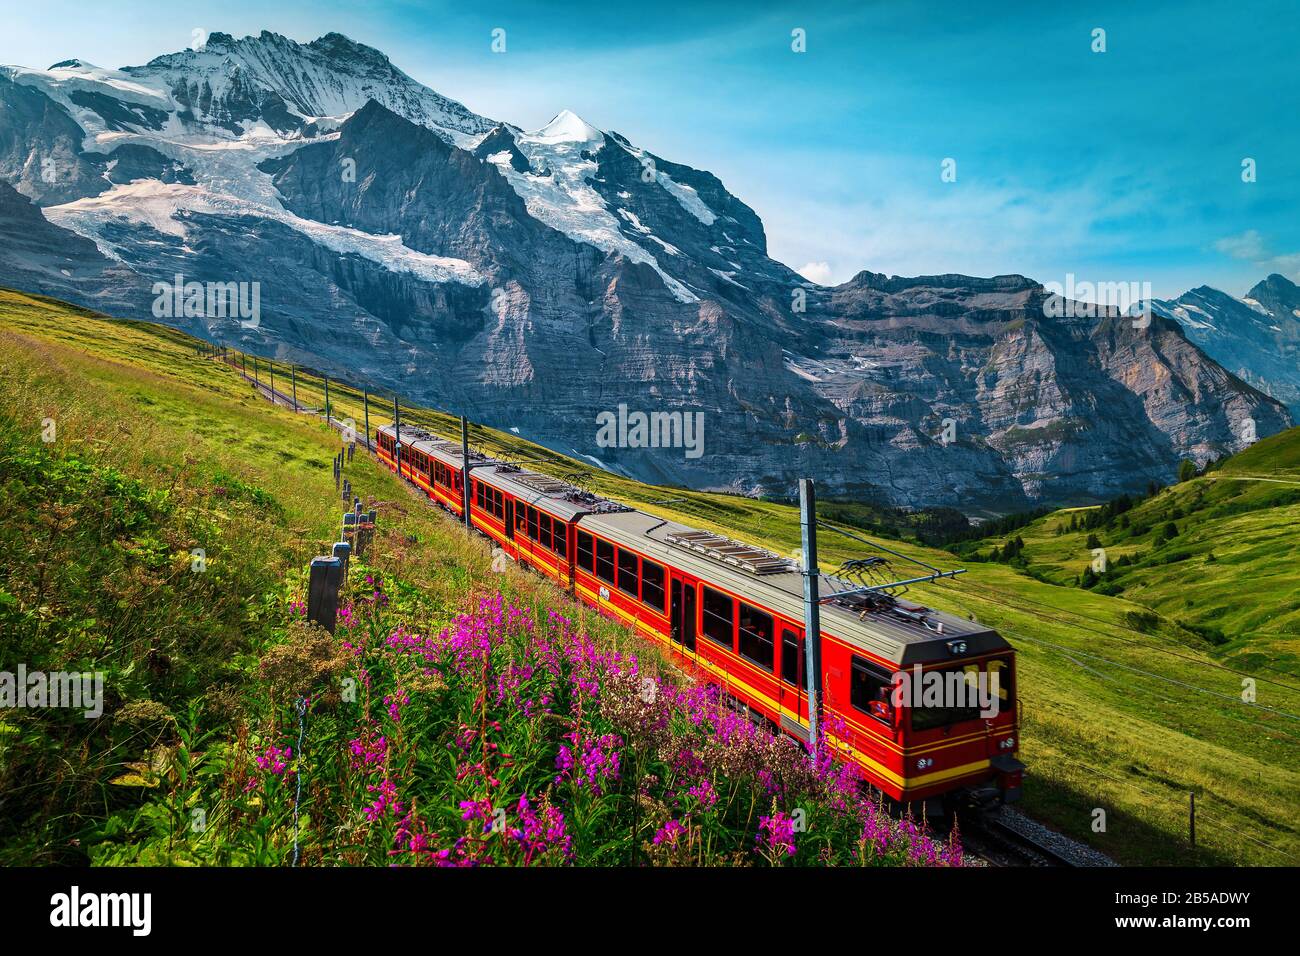 Fantastic cogwheel railway with electric red tourist train. Snowy Jungfrau mountains with glaciers, flowery fields and red passenger train, Kleine Sch Stock Photo